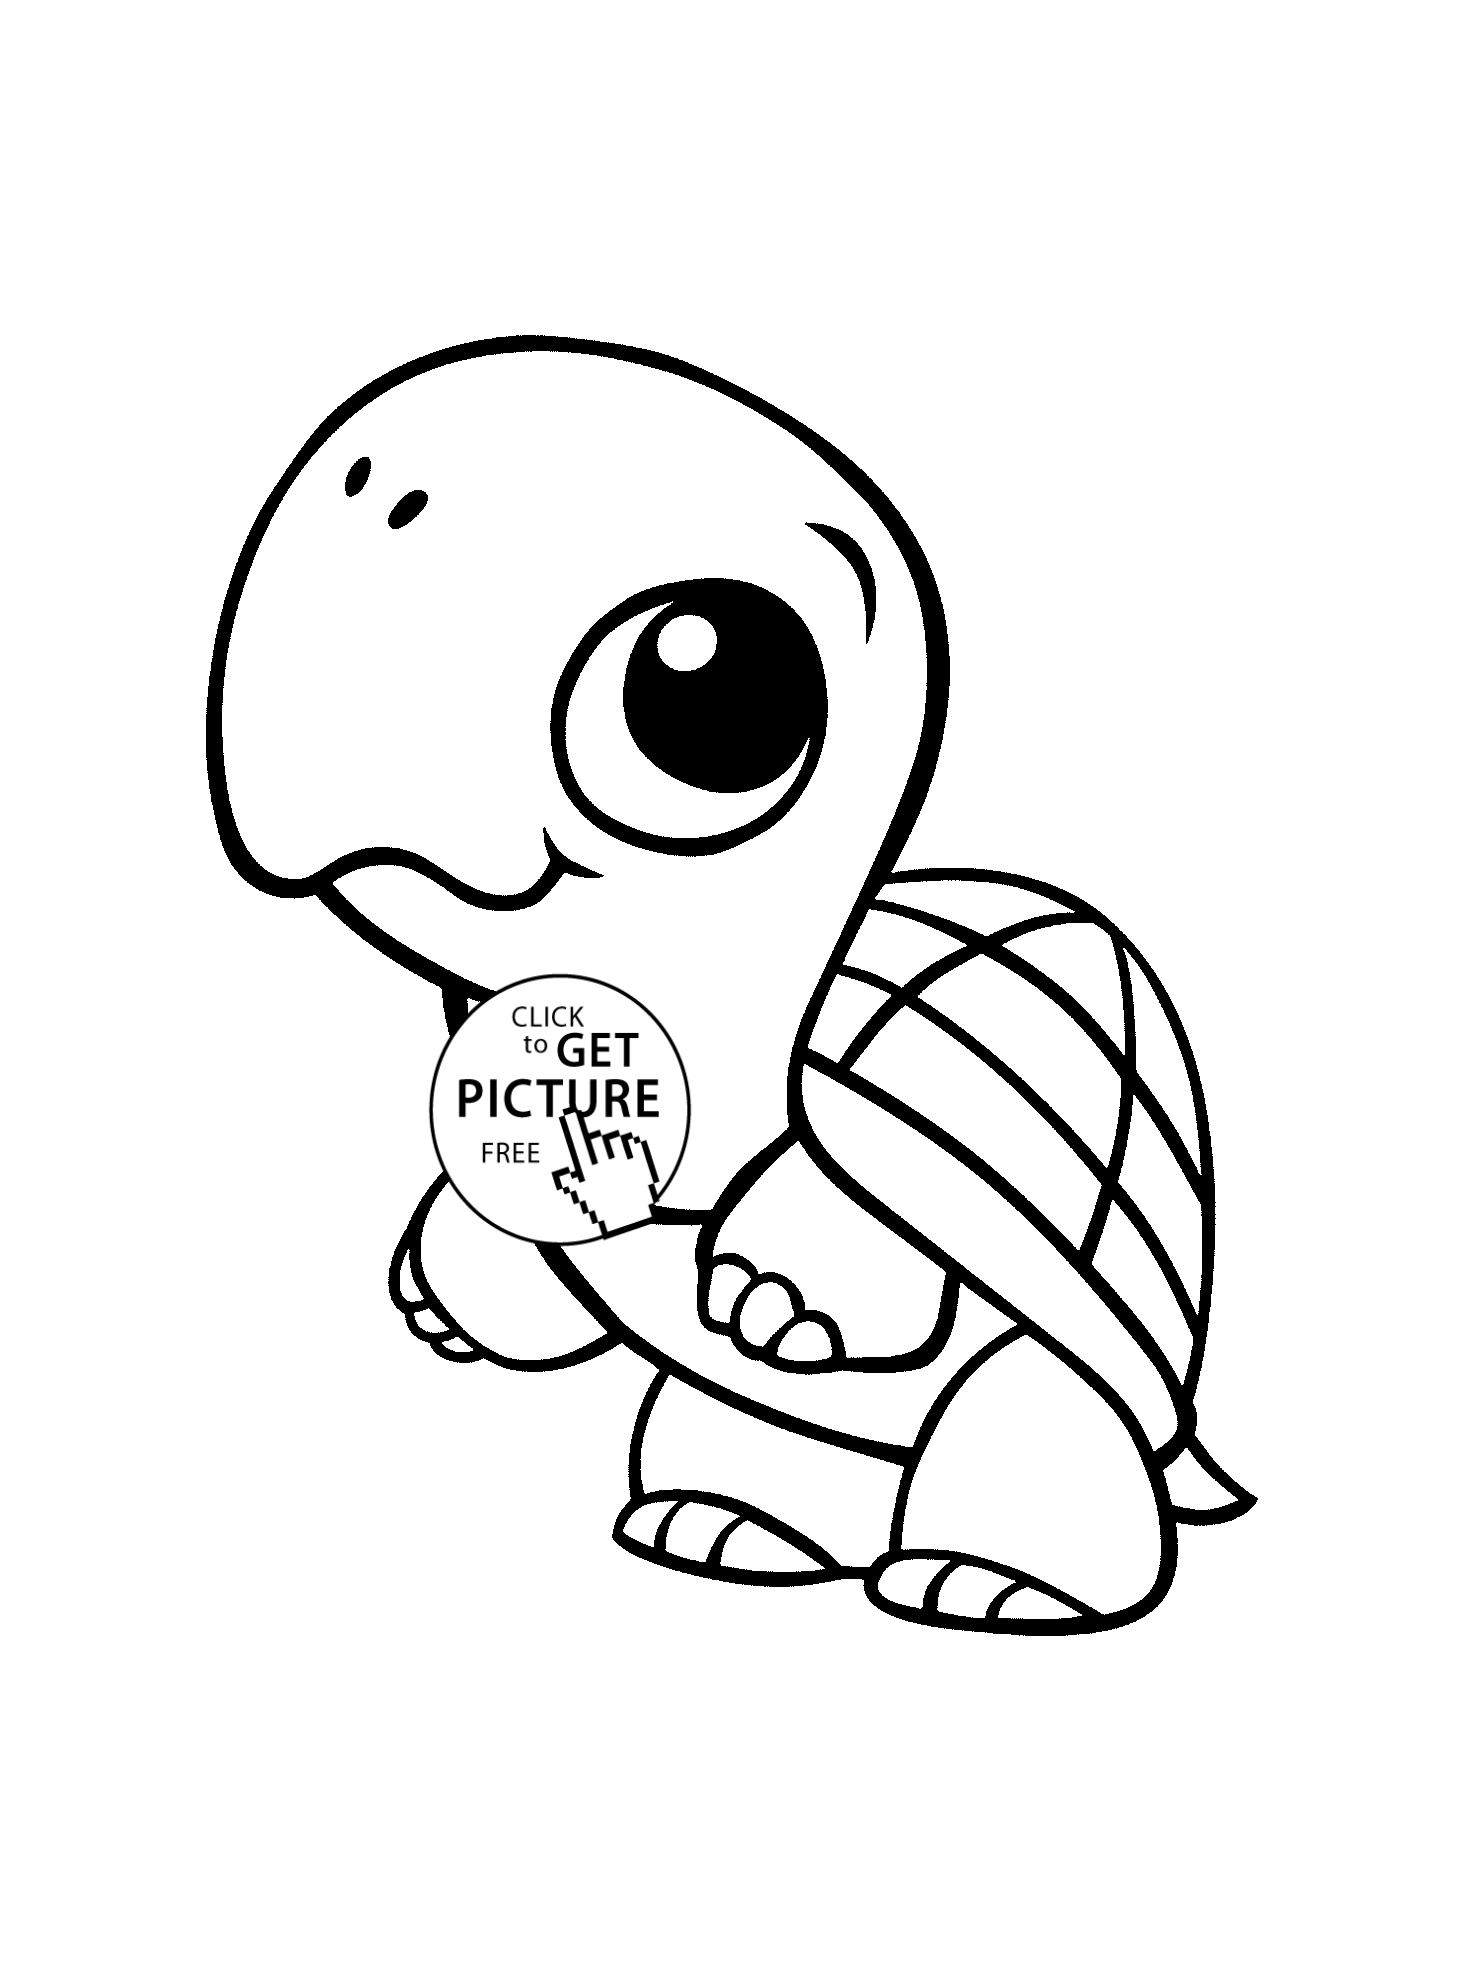 free baby animal coloring pages to print cute baby animals coloring pages getcoloringpagescom baby free to print coloring animal pages 